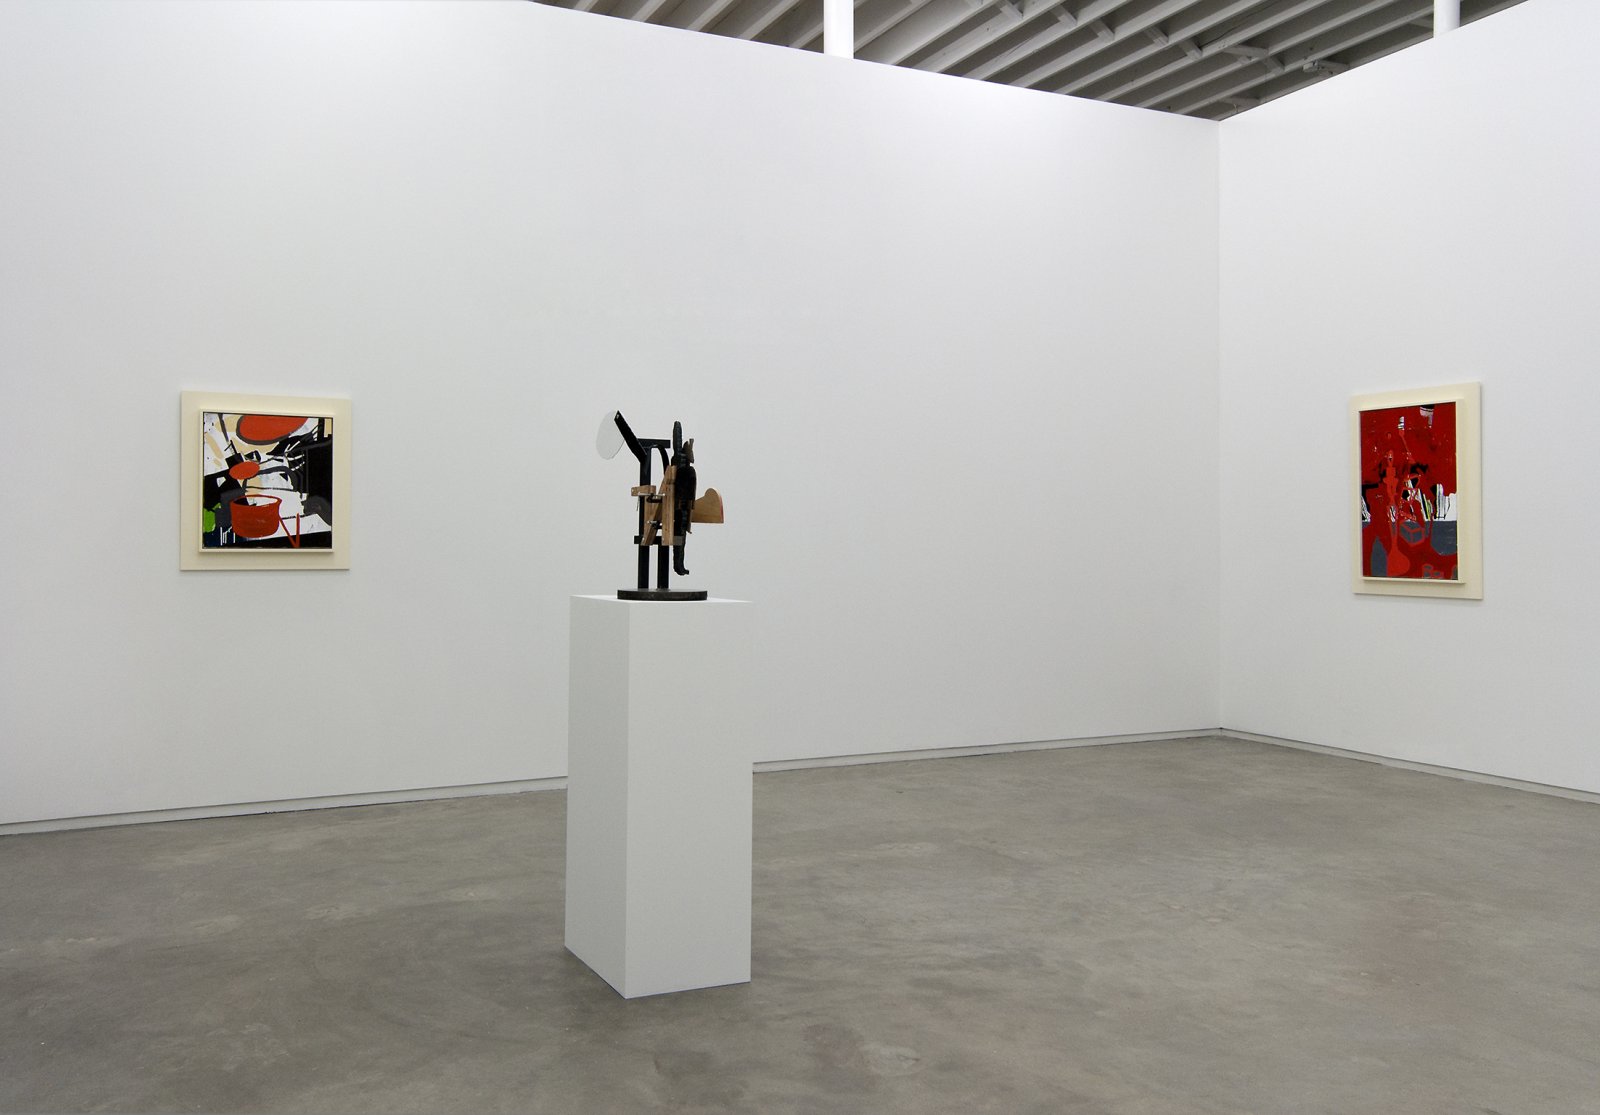 Damian Moppett, installation view, The Sculptor's Studio is a Painting, Catriona Jeffries, 2010 by Damian Moppett